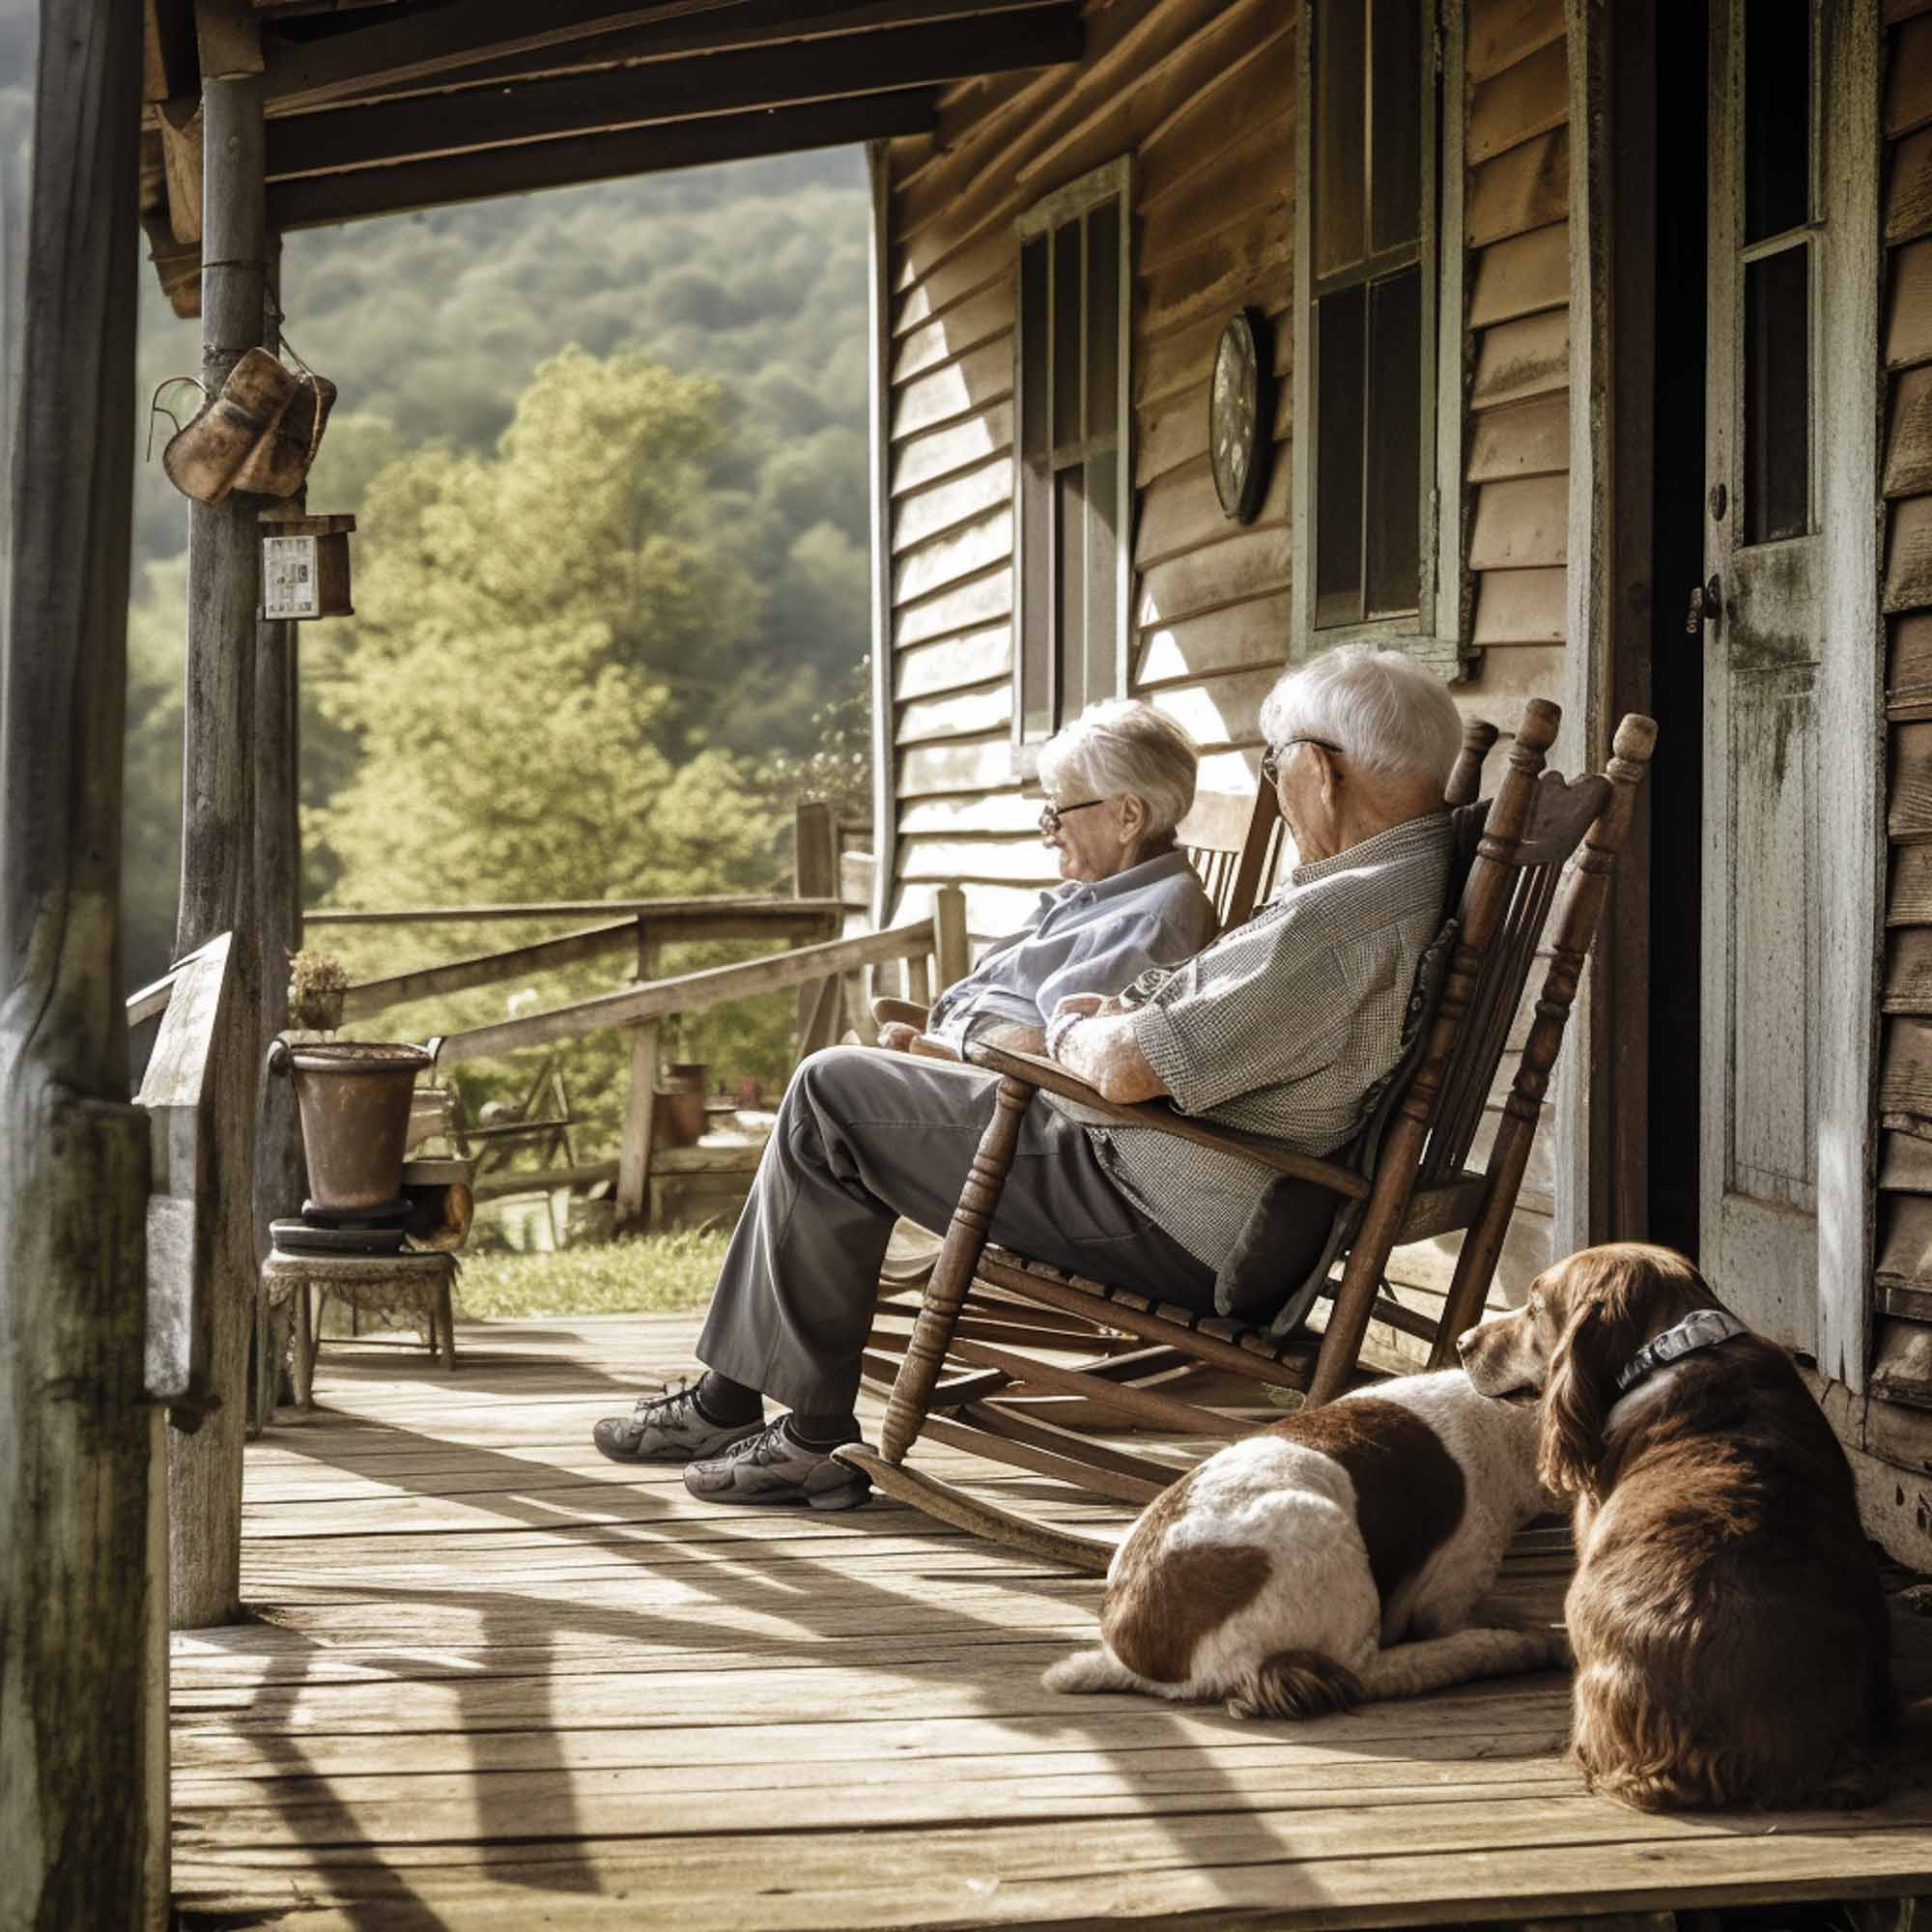 zavesmith_a_old_couple_are_sitting_on_two_rocking_chairs_on_a_w_491212f9-180e-46ca-8978-48ddda4d2942